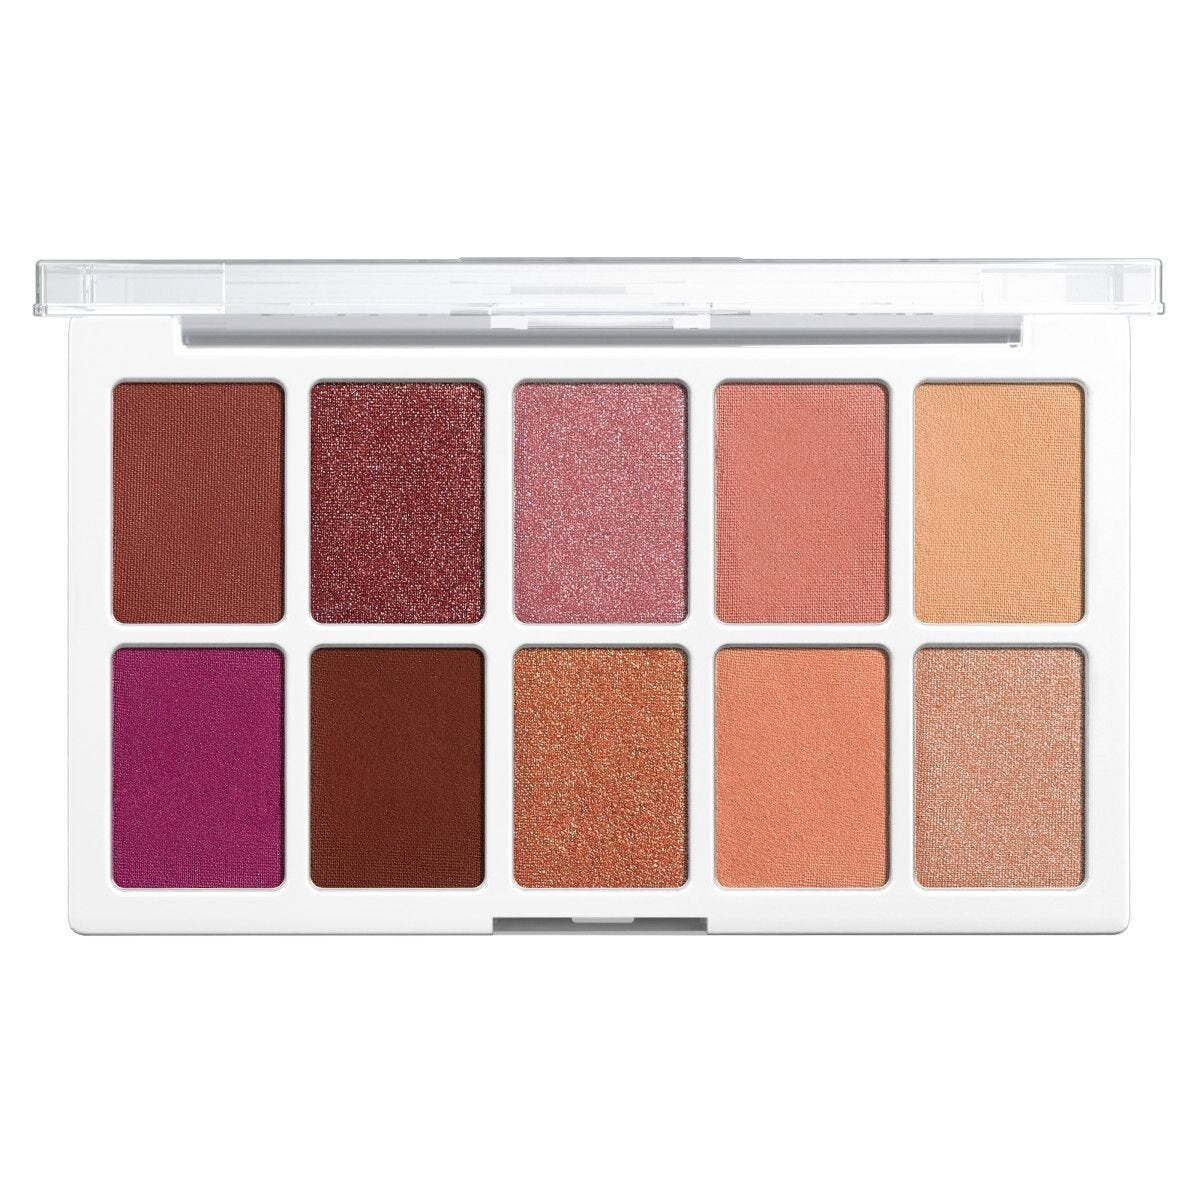 HEART AND SOL COLOR ICON 10 PAN EYESHADOW PALETTE - WET N WILD